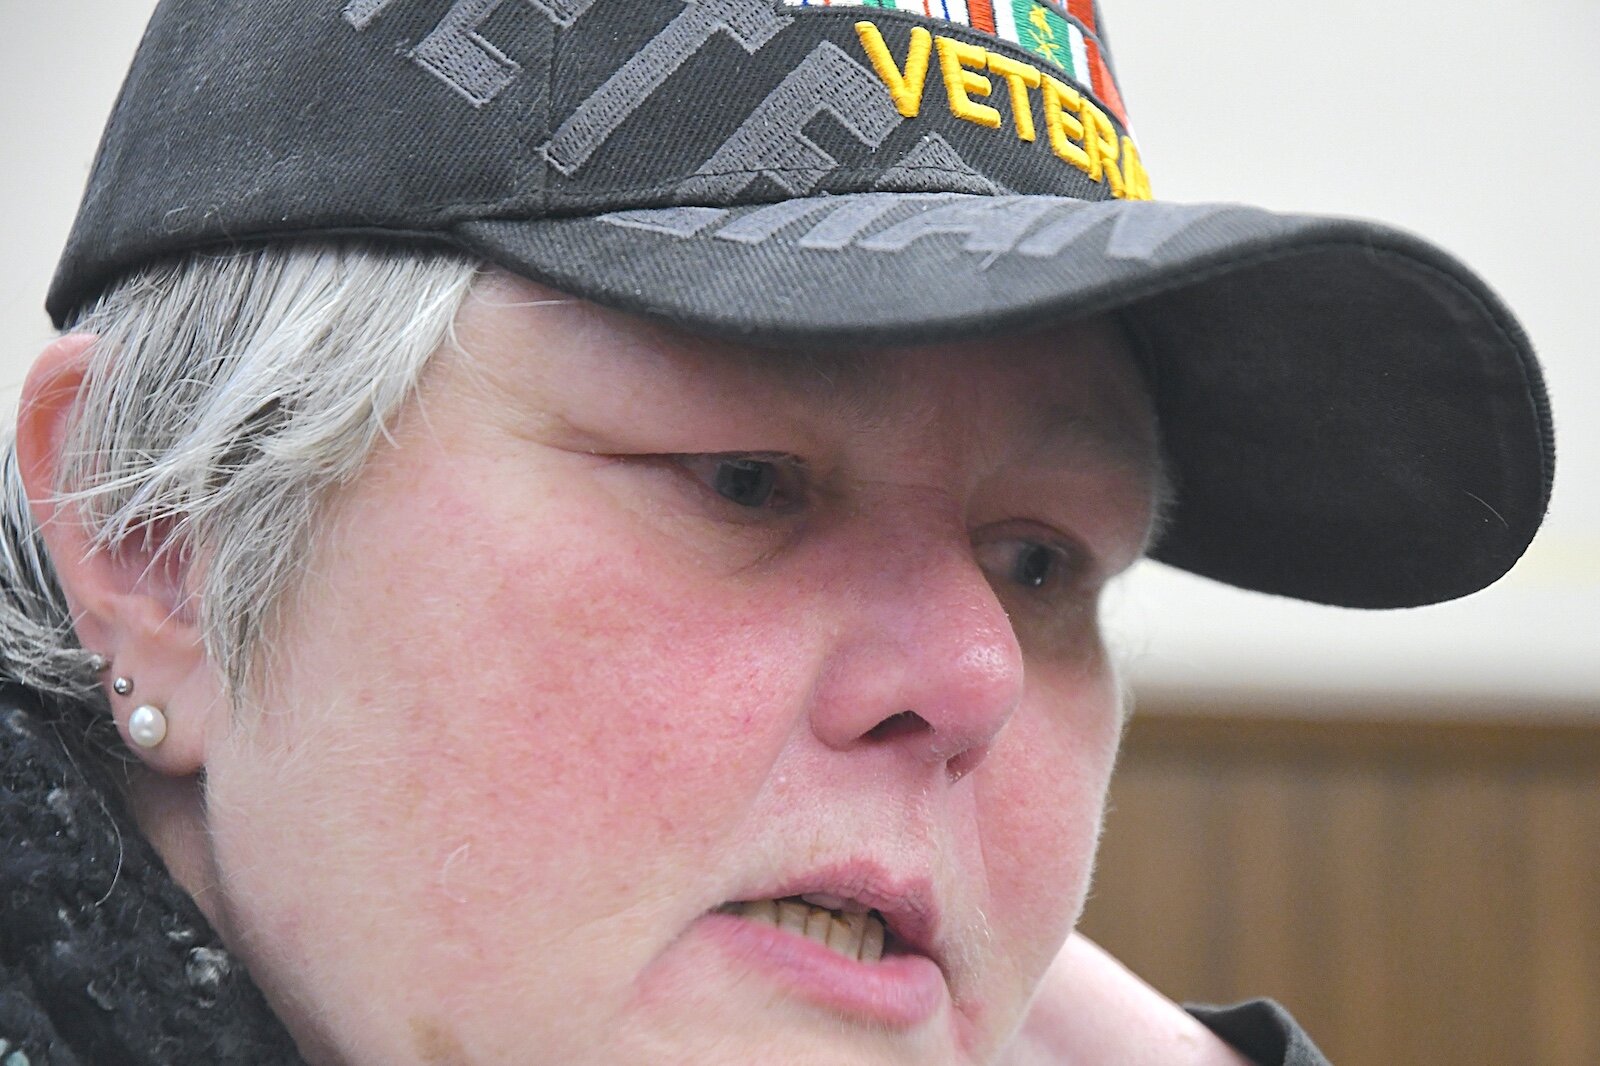 Mary Bourgeois, a U.S. Army veteran, reflects on part of her service.